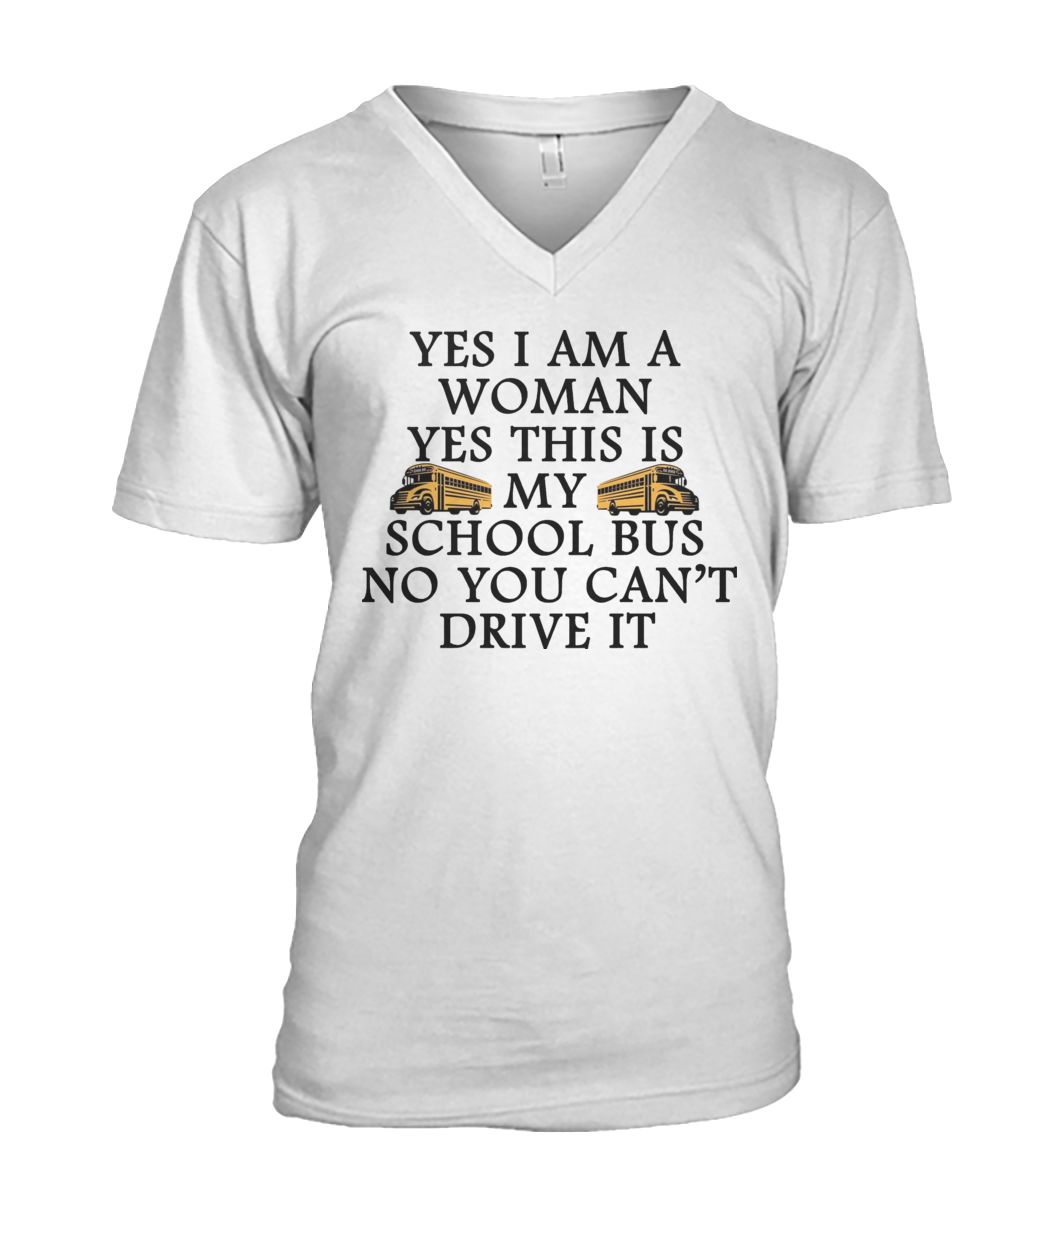 Yes I am a woman yes this is my school bus no you can't drive it mens v-neck